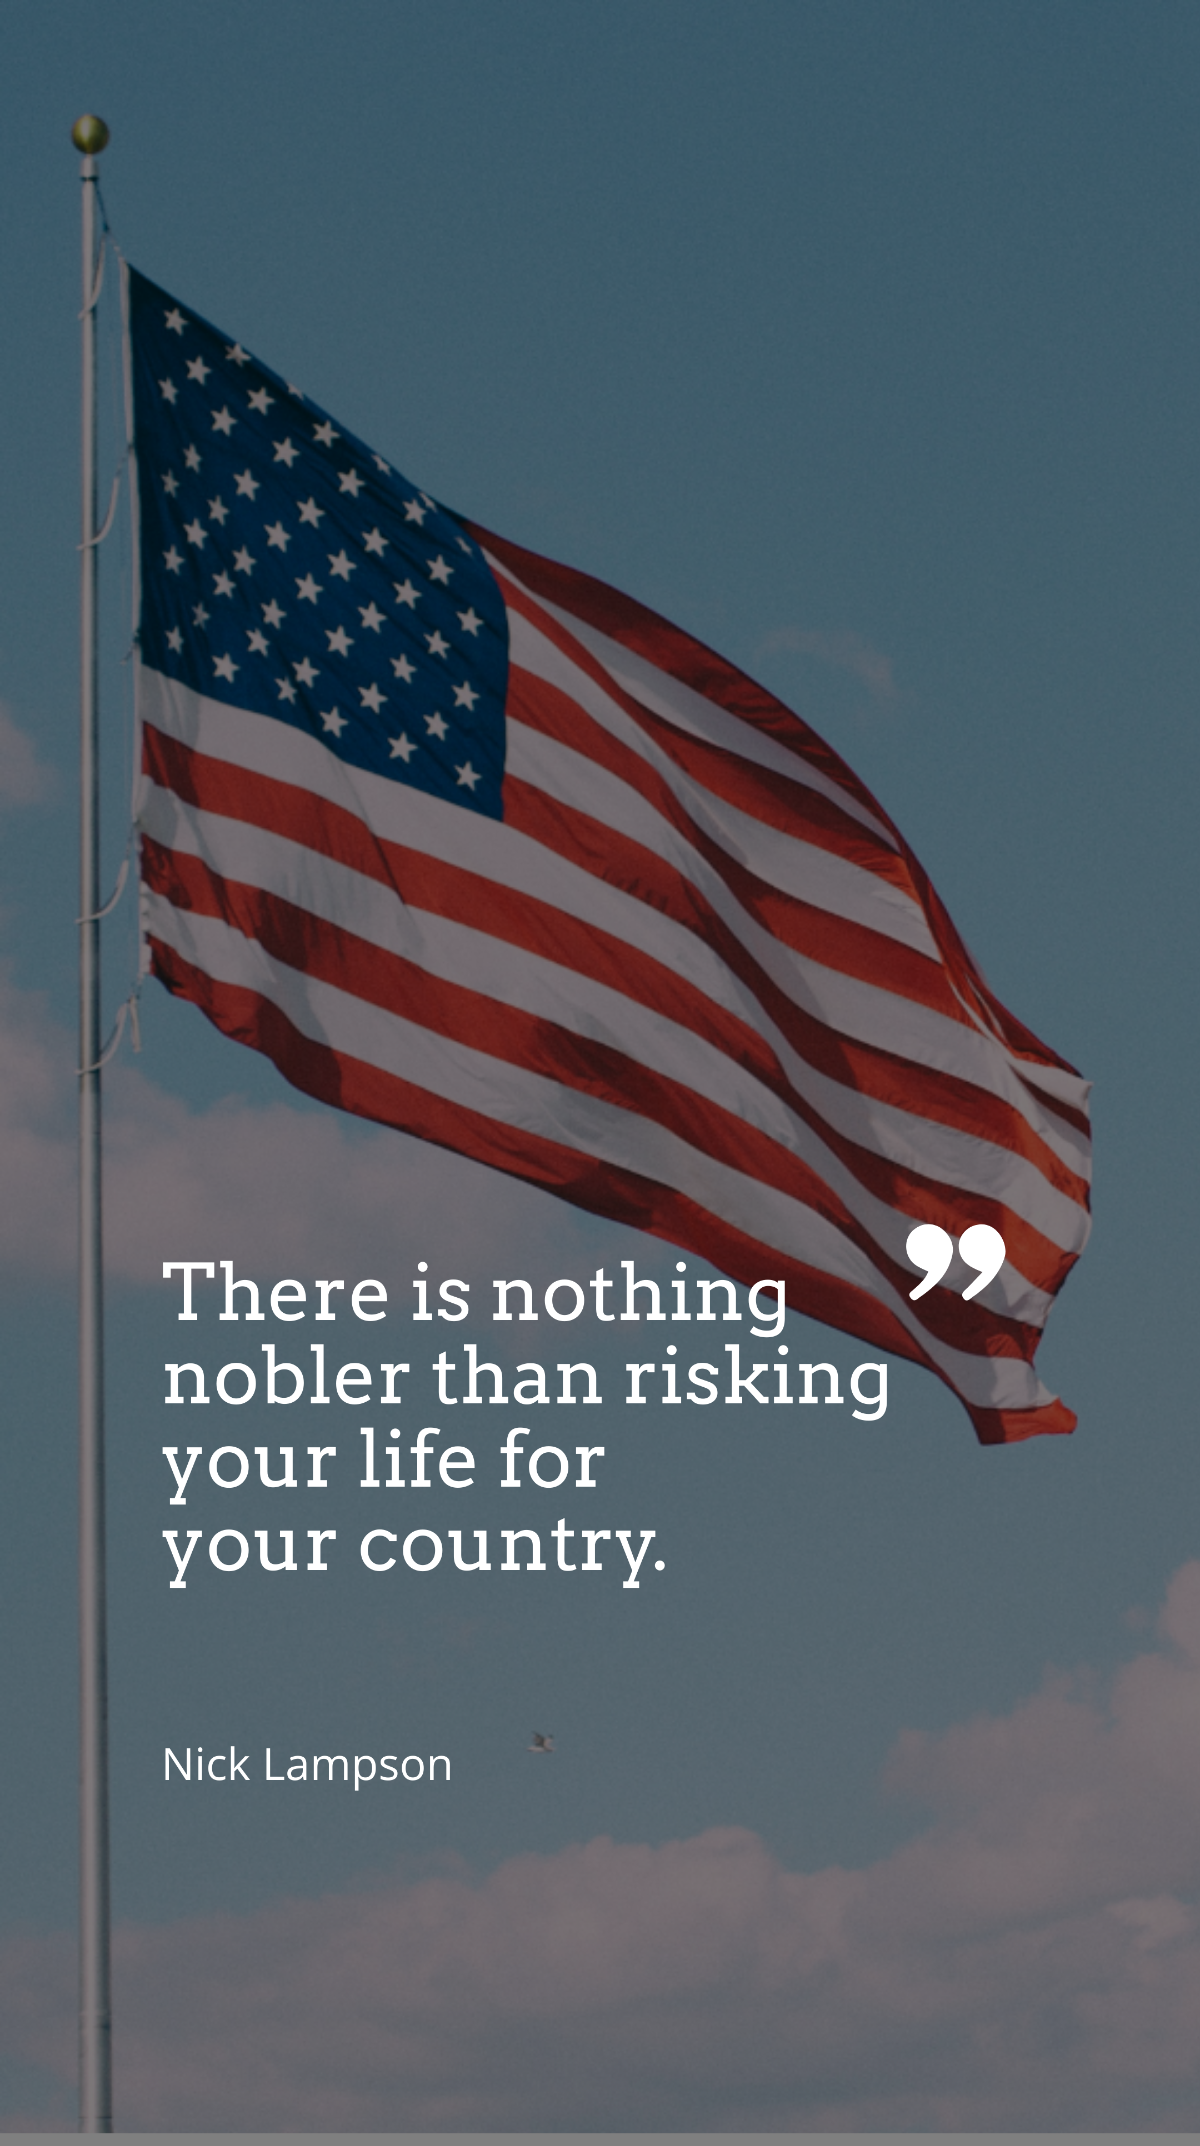 Nick Lampson - There is nothing nobler than risking your life for your country. Template